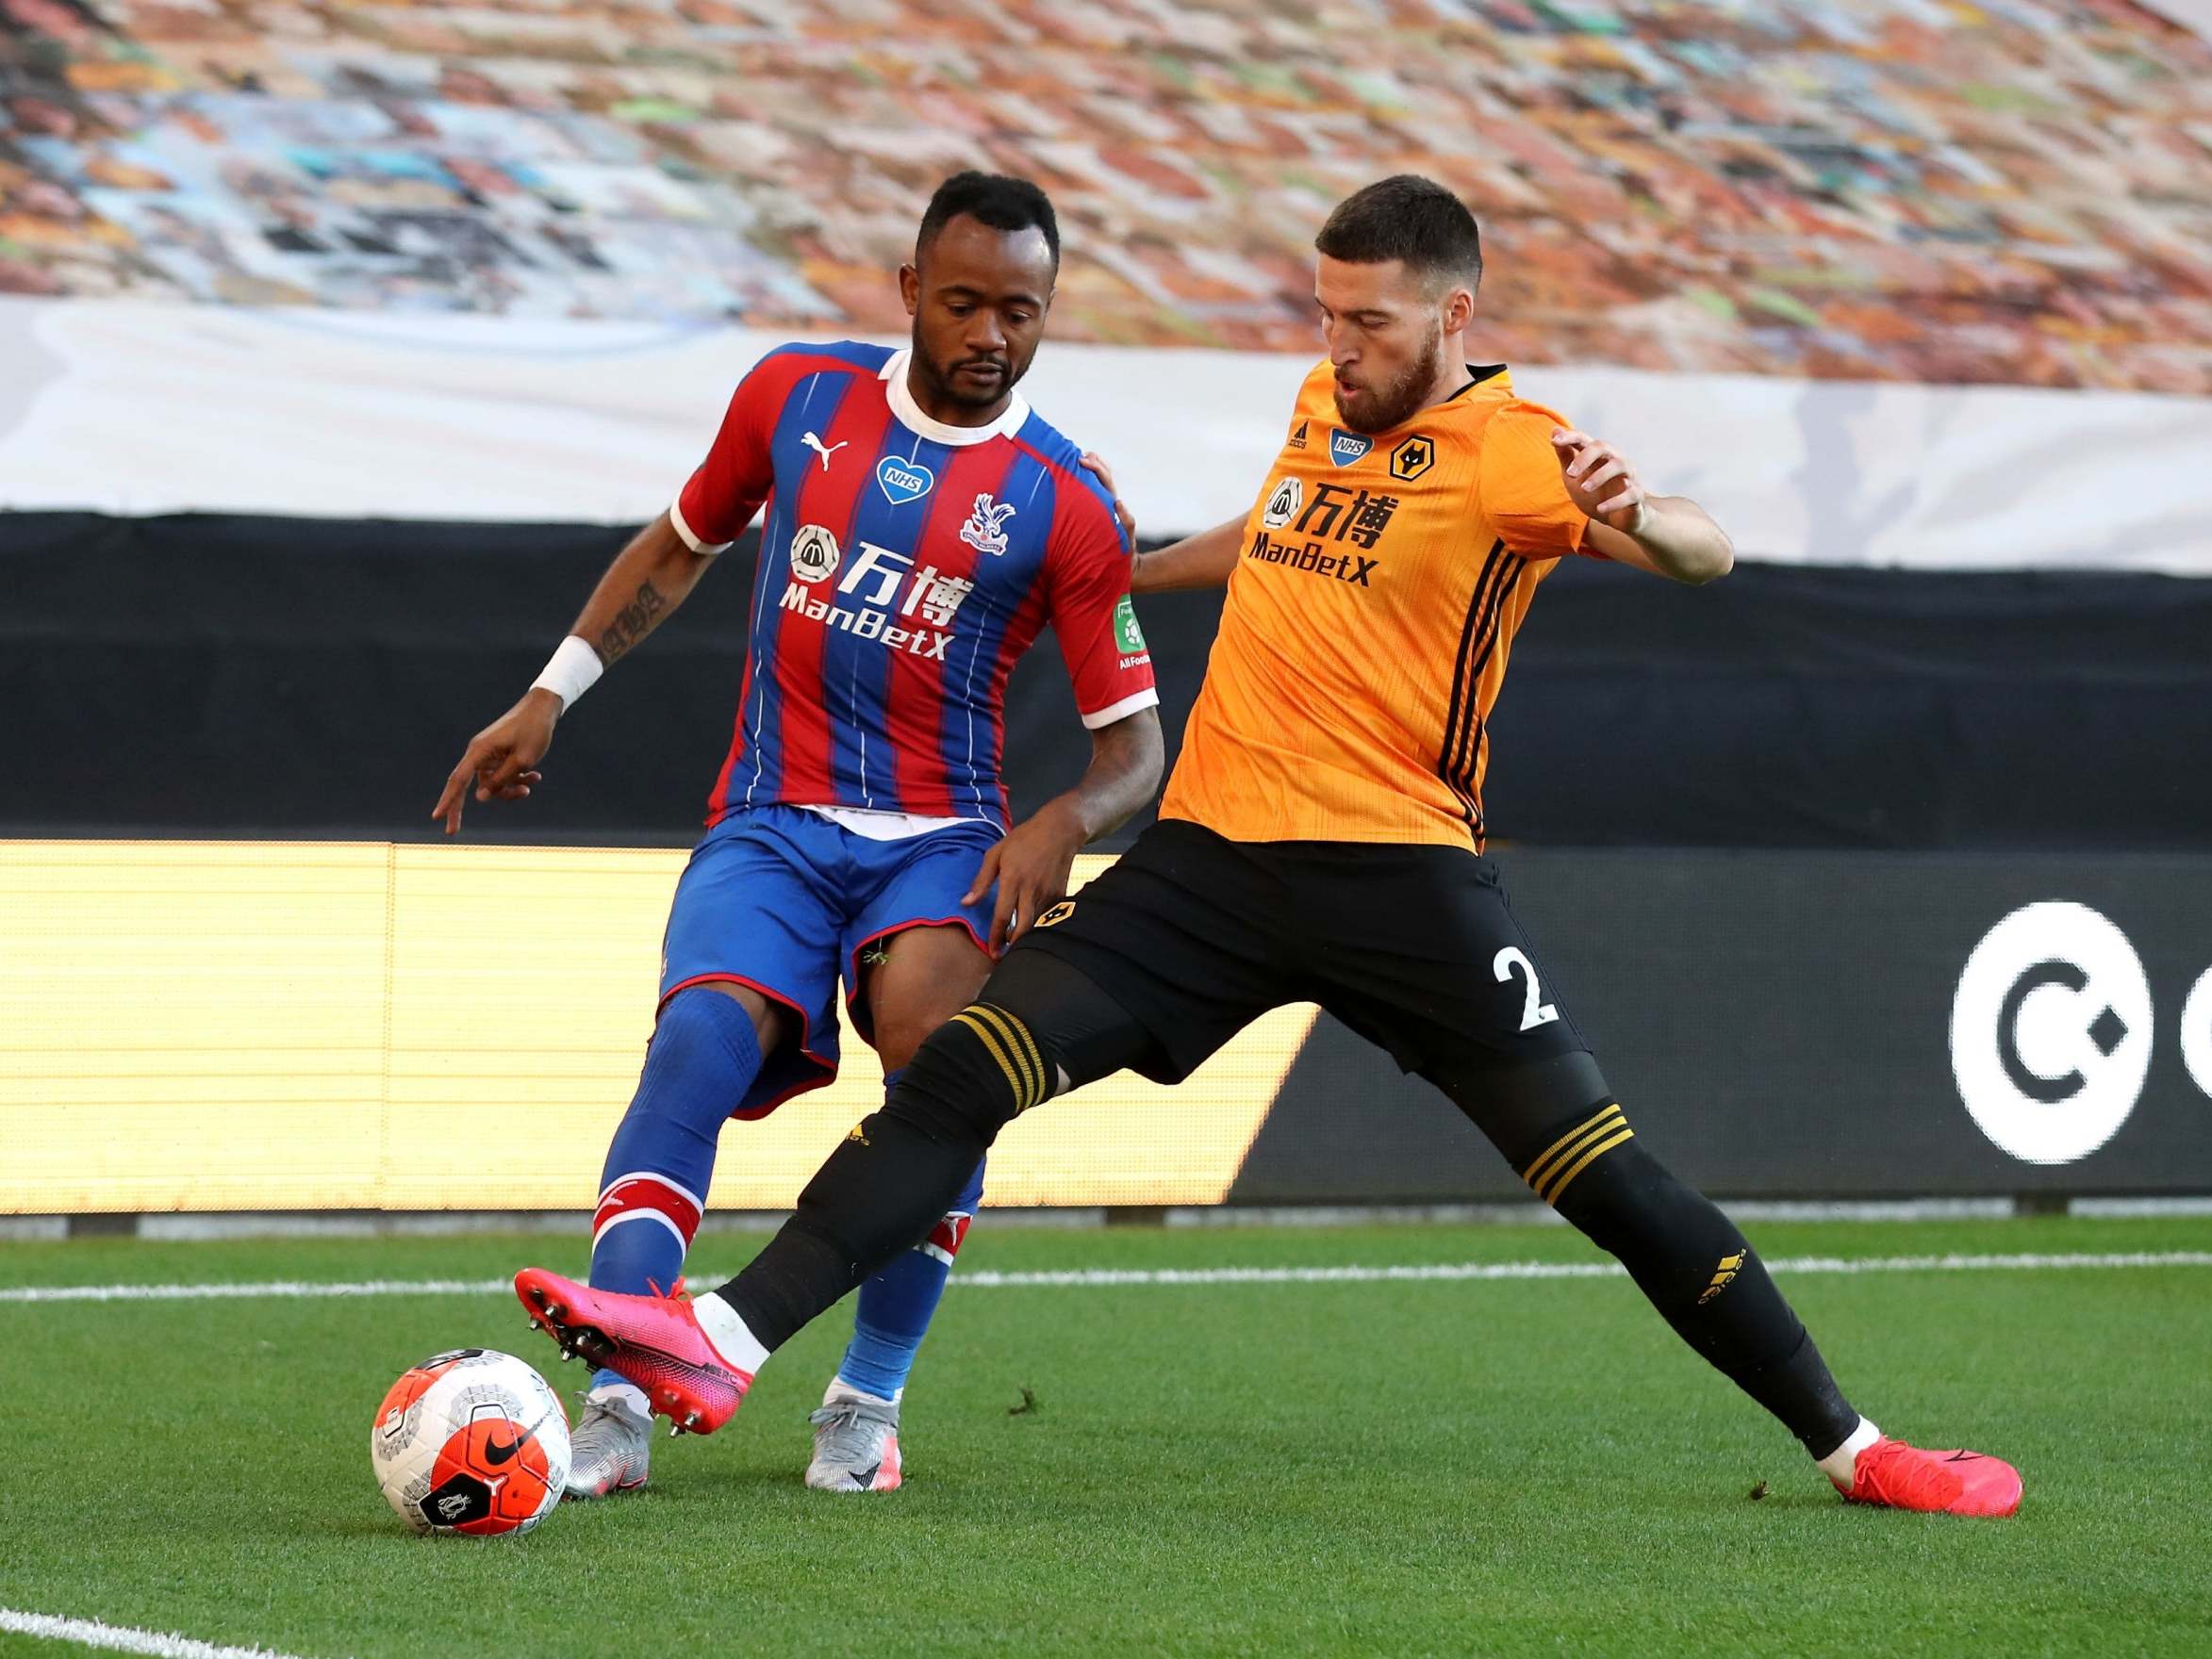 Wolves Travel to Palace for Fascinating EPL Clash!